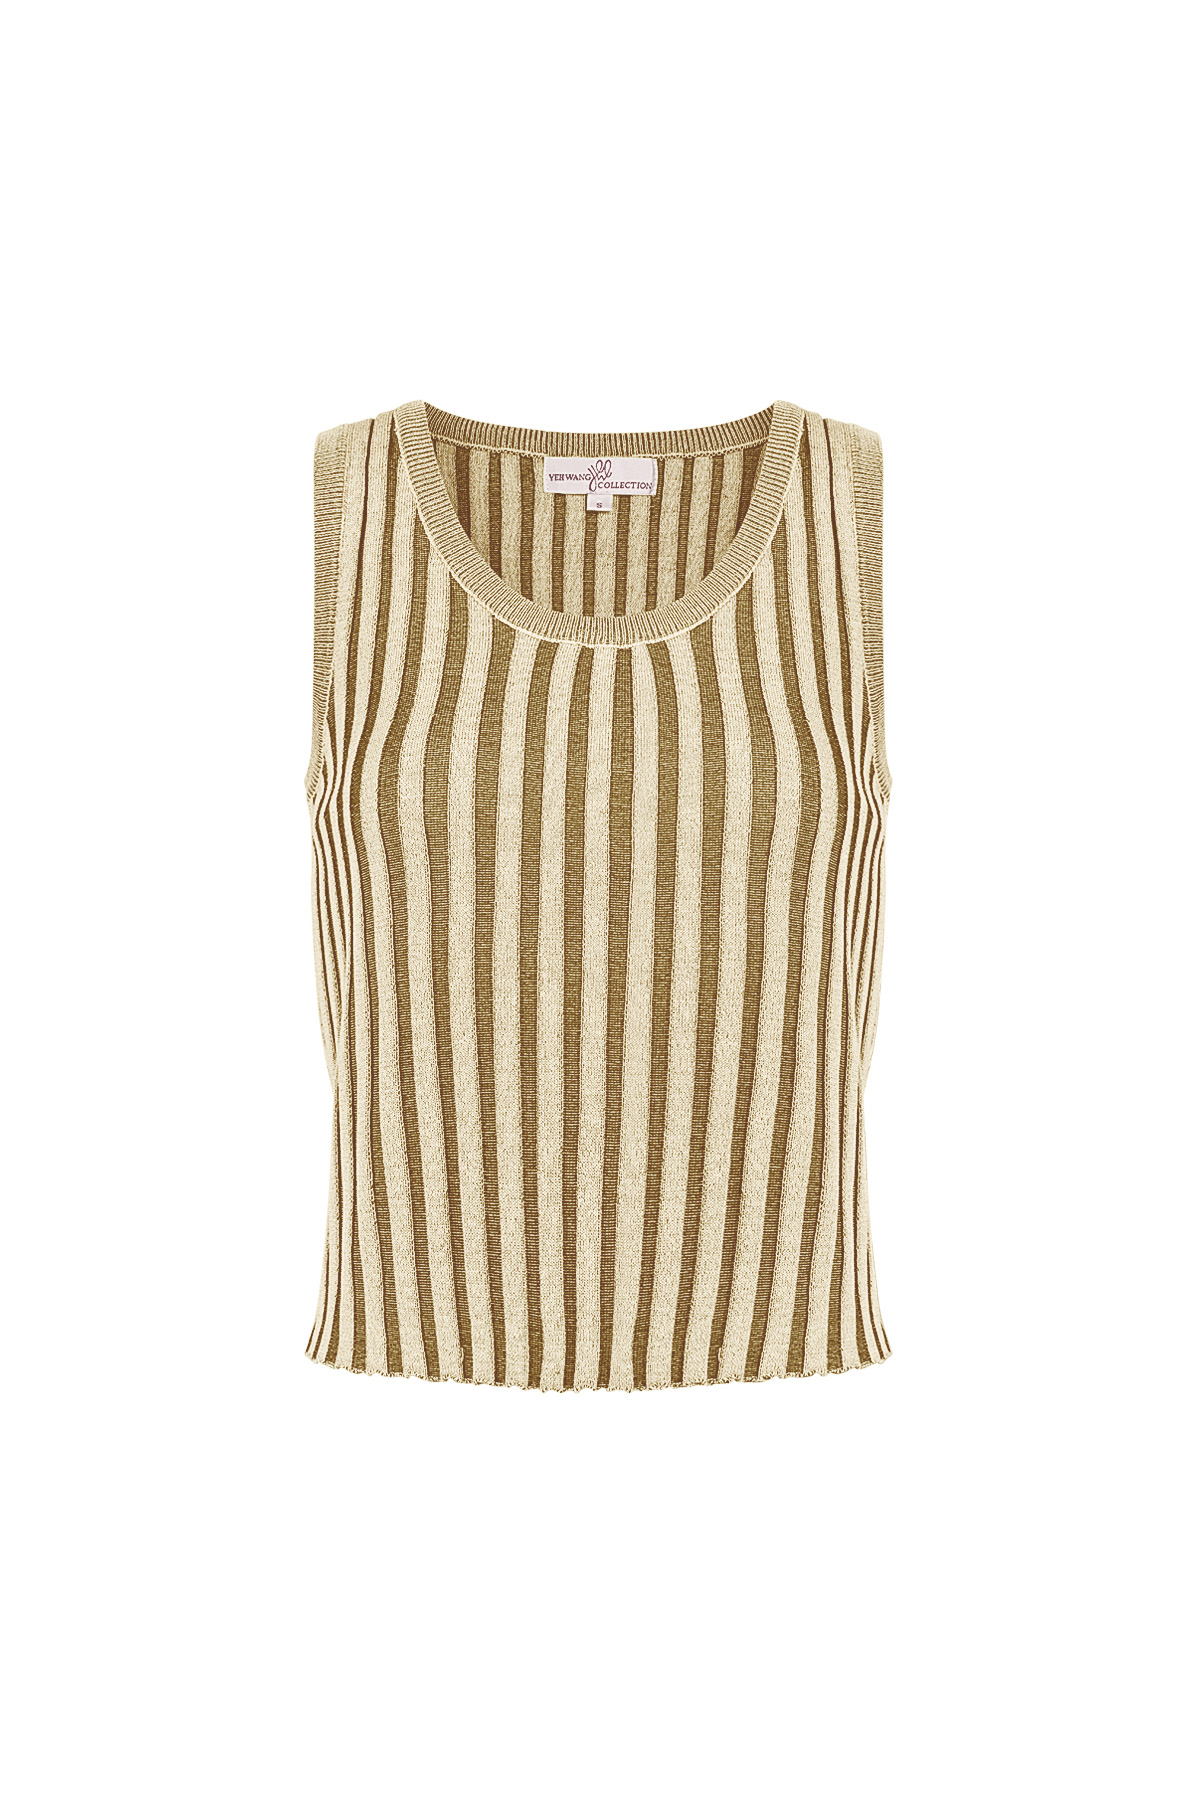 Sleeveless, striped top small - beige 